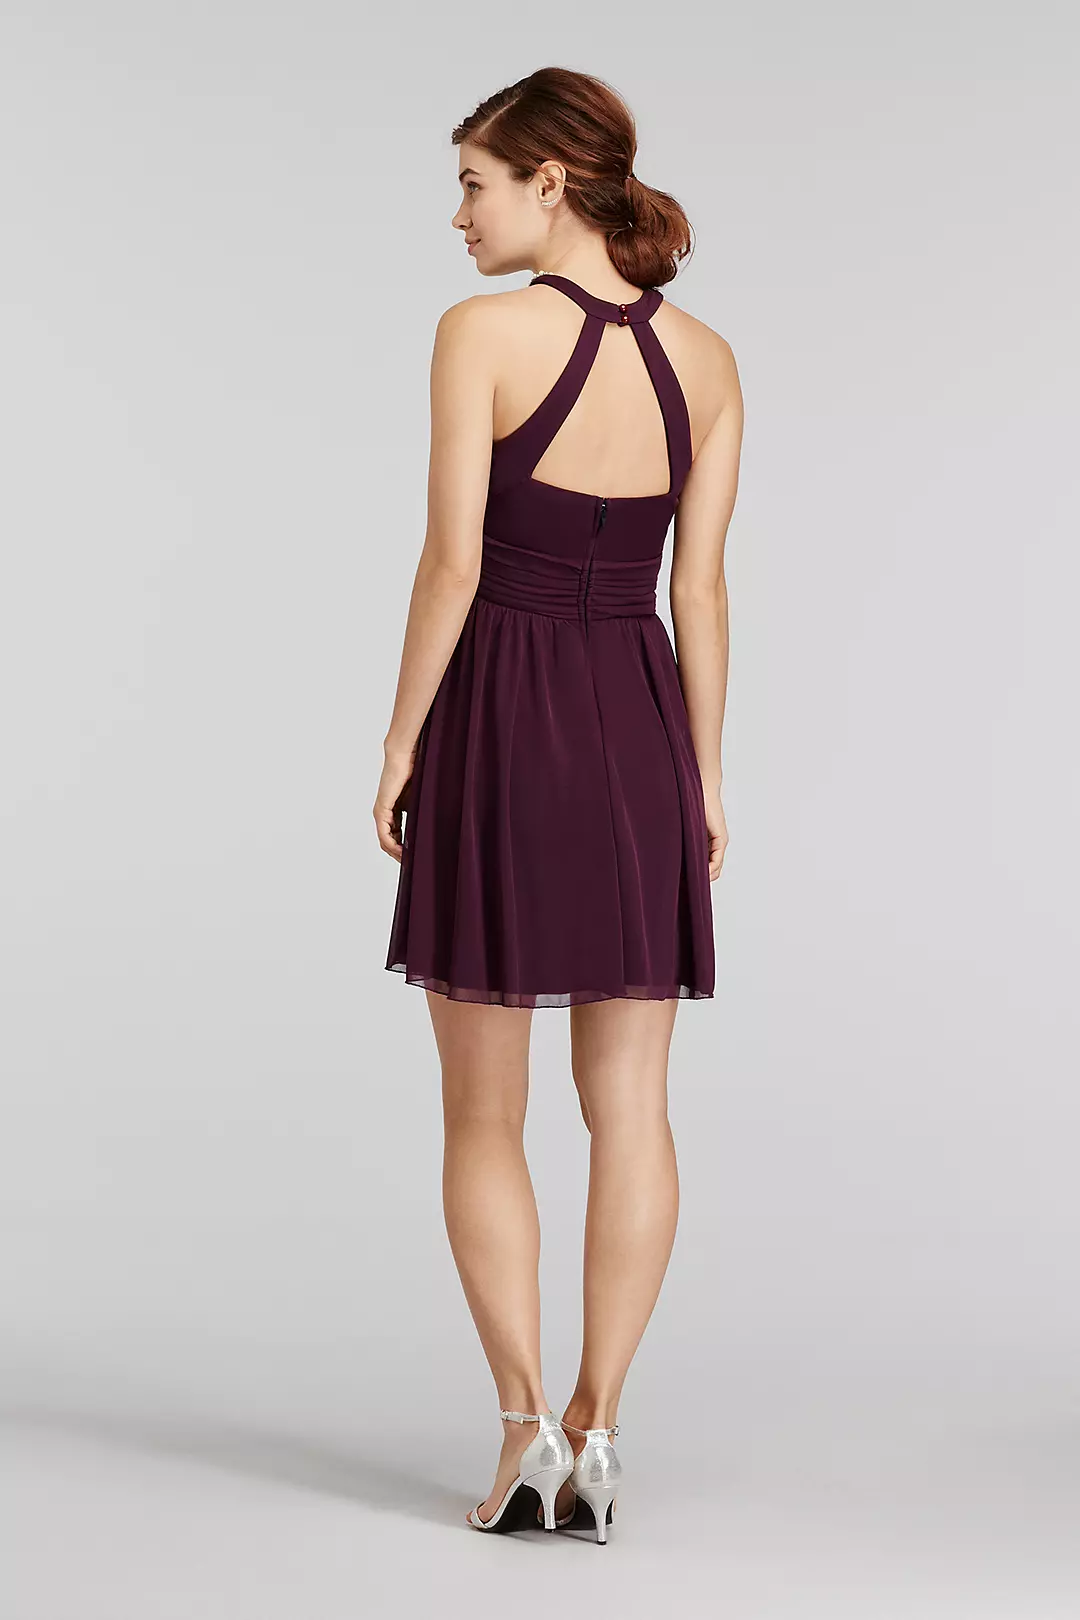 Pearl Trimed Halter Dress with Illusion Neckline Image 2